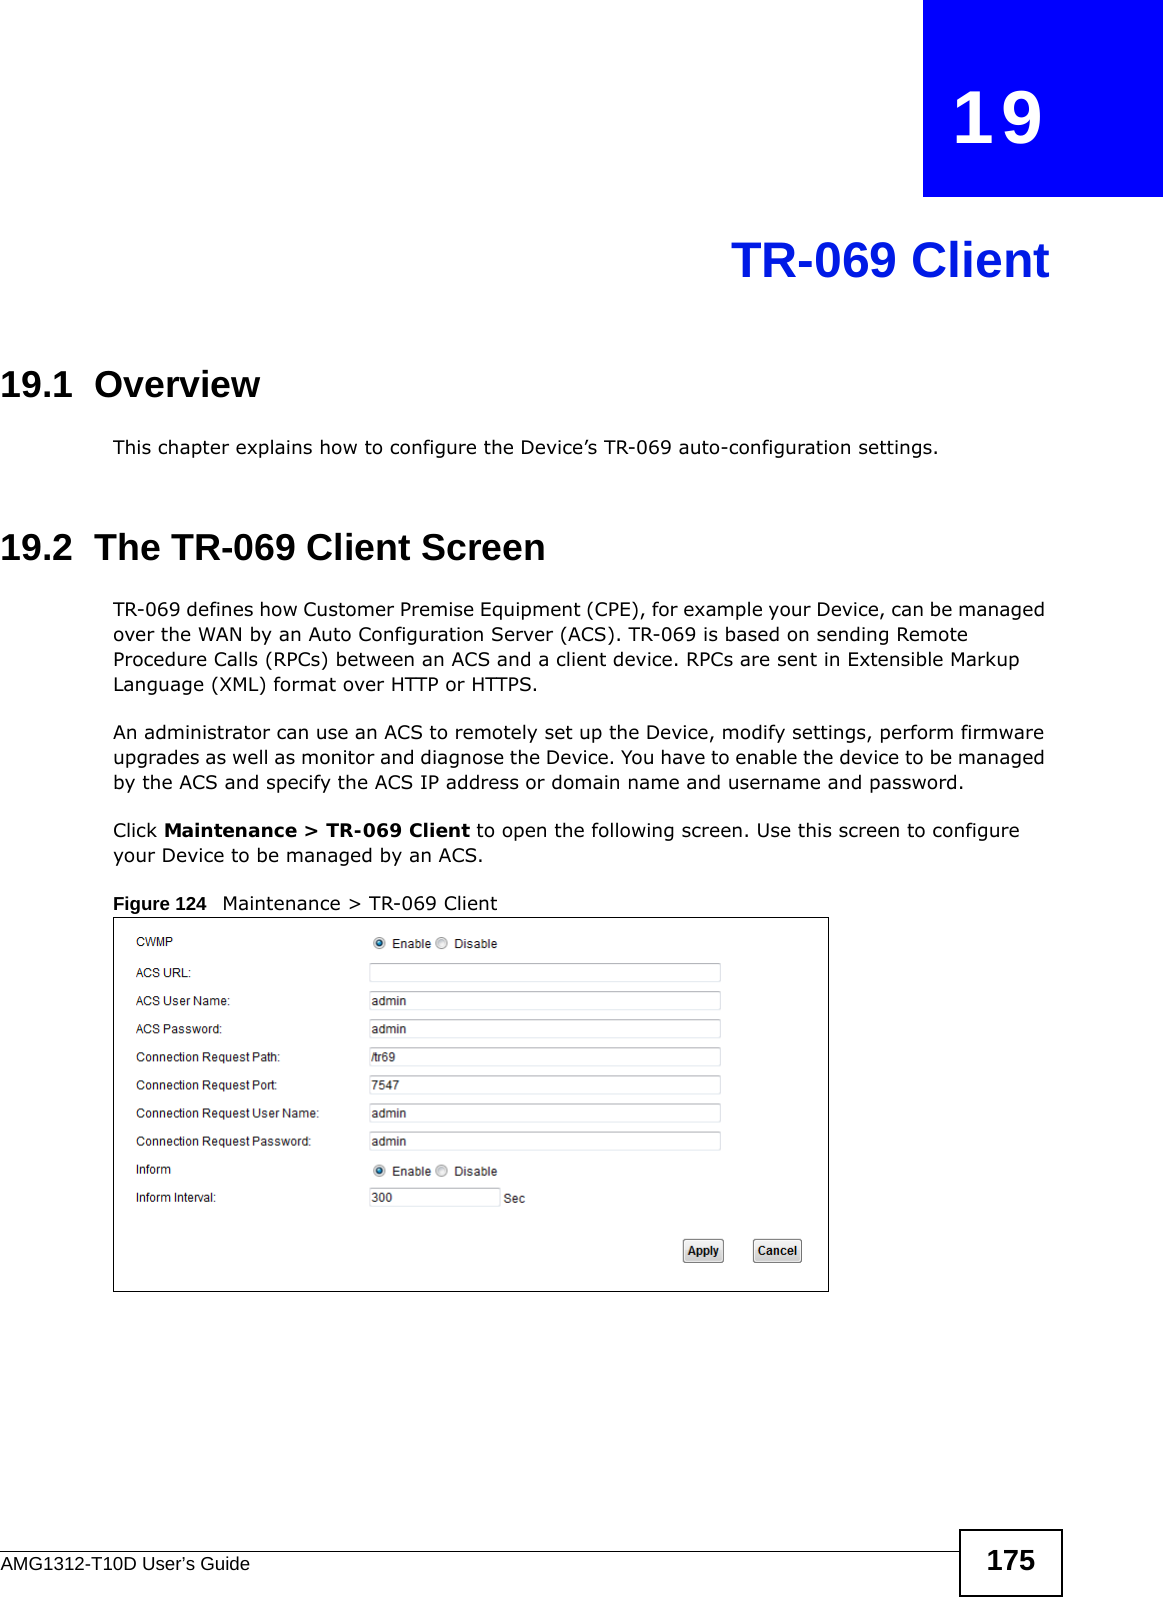 AMG1312-T10D User’s Guide 175CHAPTER   19TR-069 Client19.1  OverviewThis chapter explains how to configure the Device’s TR-069 auto-configuration settings.19.2  The TR-069 Client ScreenTR-069 defines how Customer Premise Equipment (CPE), for example your Device, can be managed over the WAN by an Auto Configuration Server (ACS). TR-069 is based on sending Remote Procedure Calls (RPCs) between an ACS and a client device. RPCs are sent in Extensible Markup Language (XML) format over HTTP or HTTPS. An administrator can use an ACS to remotely set up the Device, modify settings, perform firmware upgrades as well as monitor and diagnose the Device. You have to enable the device to be managed by the ACS and specify the ACS IP address or domain name and username and password.Click Maintenance &gt; TR-069 Client to open the following screen. Use this screen to configure your Device to be managed by an ACS. Figure 124   Maintenance &gt; TR-069 Client 